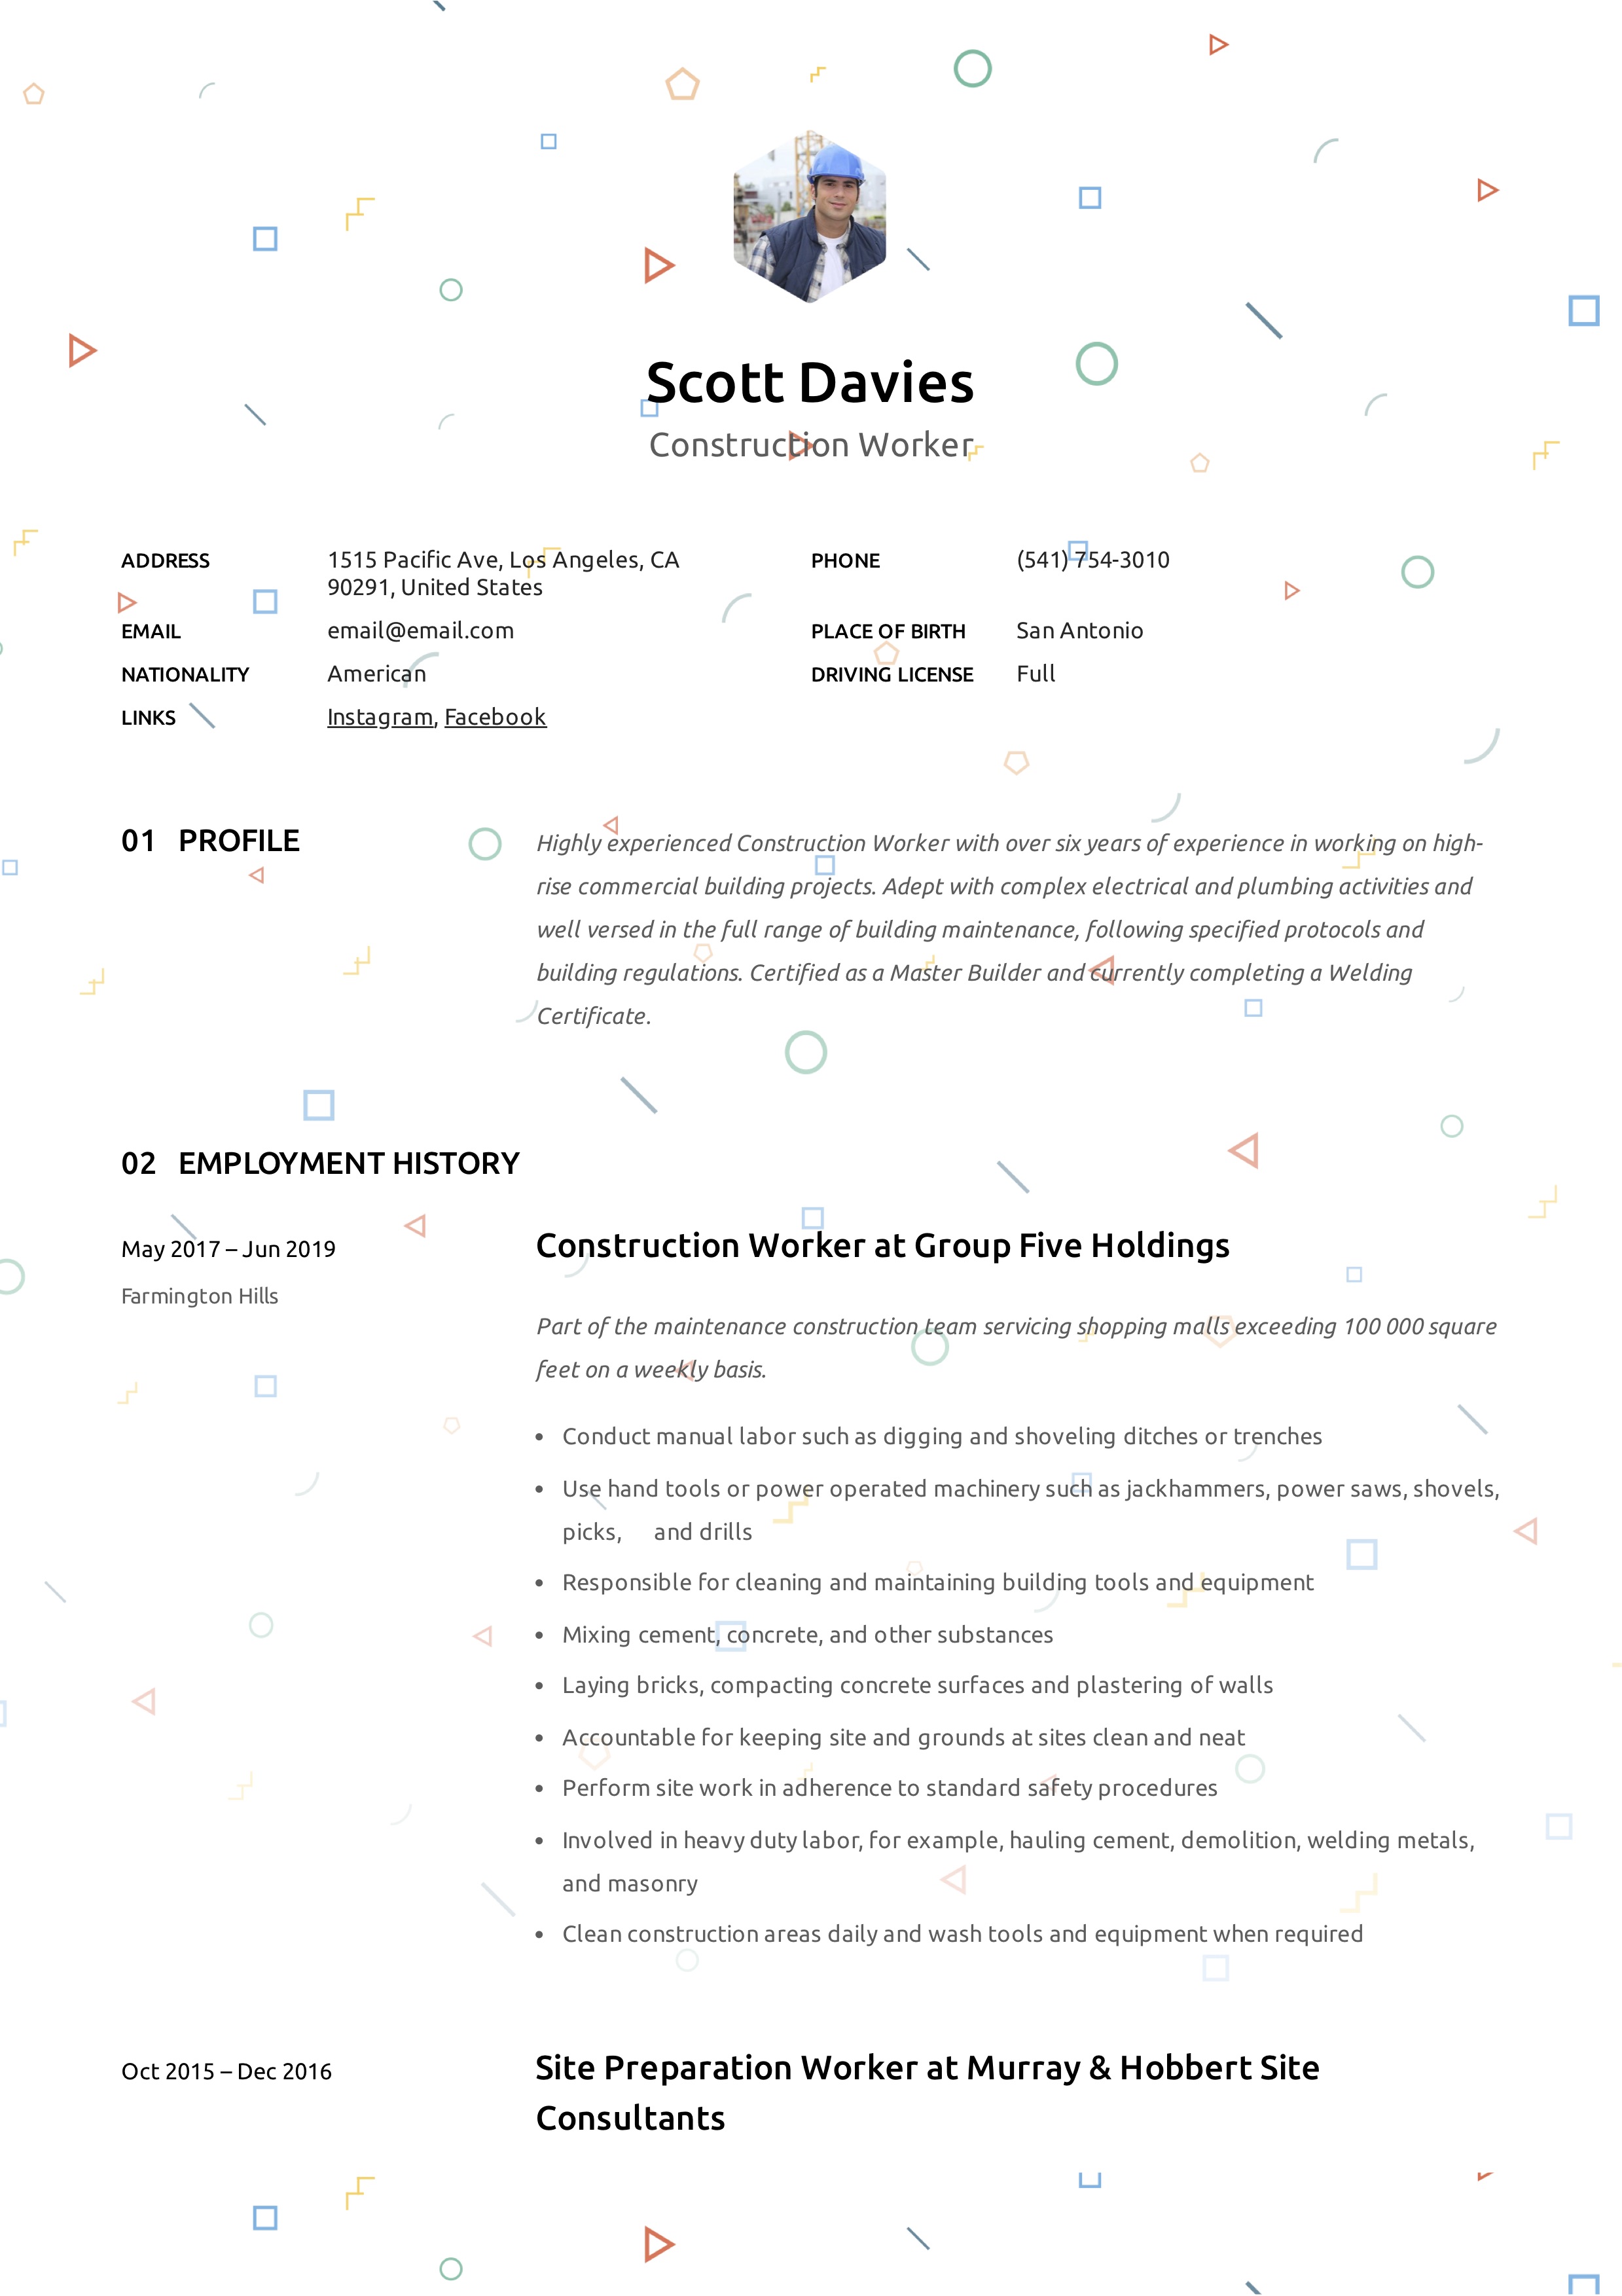 Resume Template Construction Worker